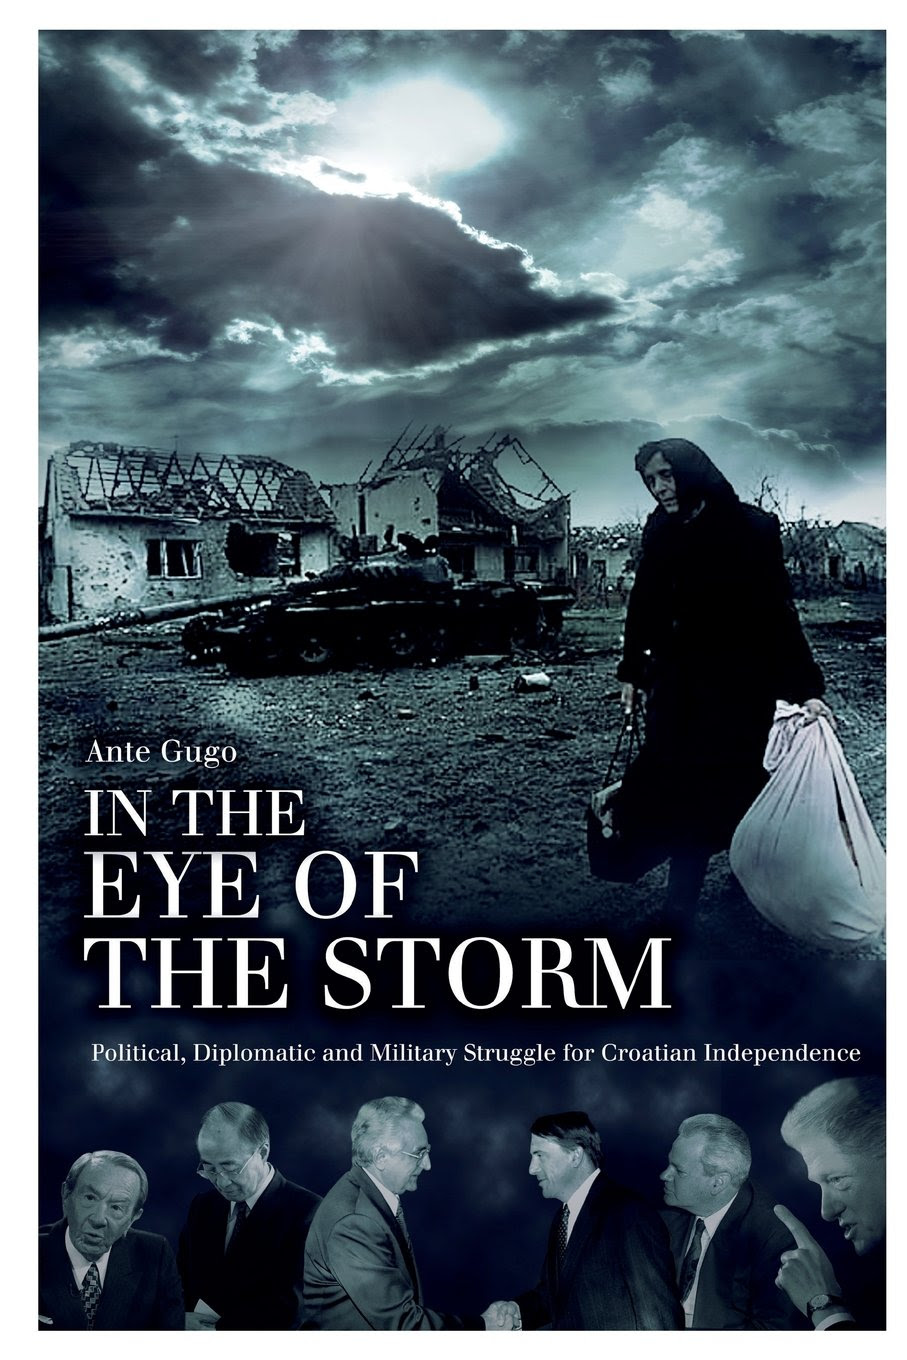 Front Cover of book by Ante Gugo translated into English "In The Eye Of The Storm"